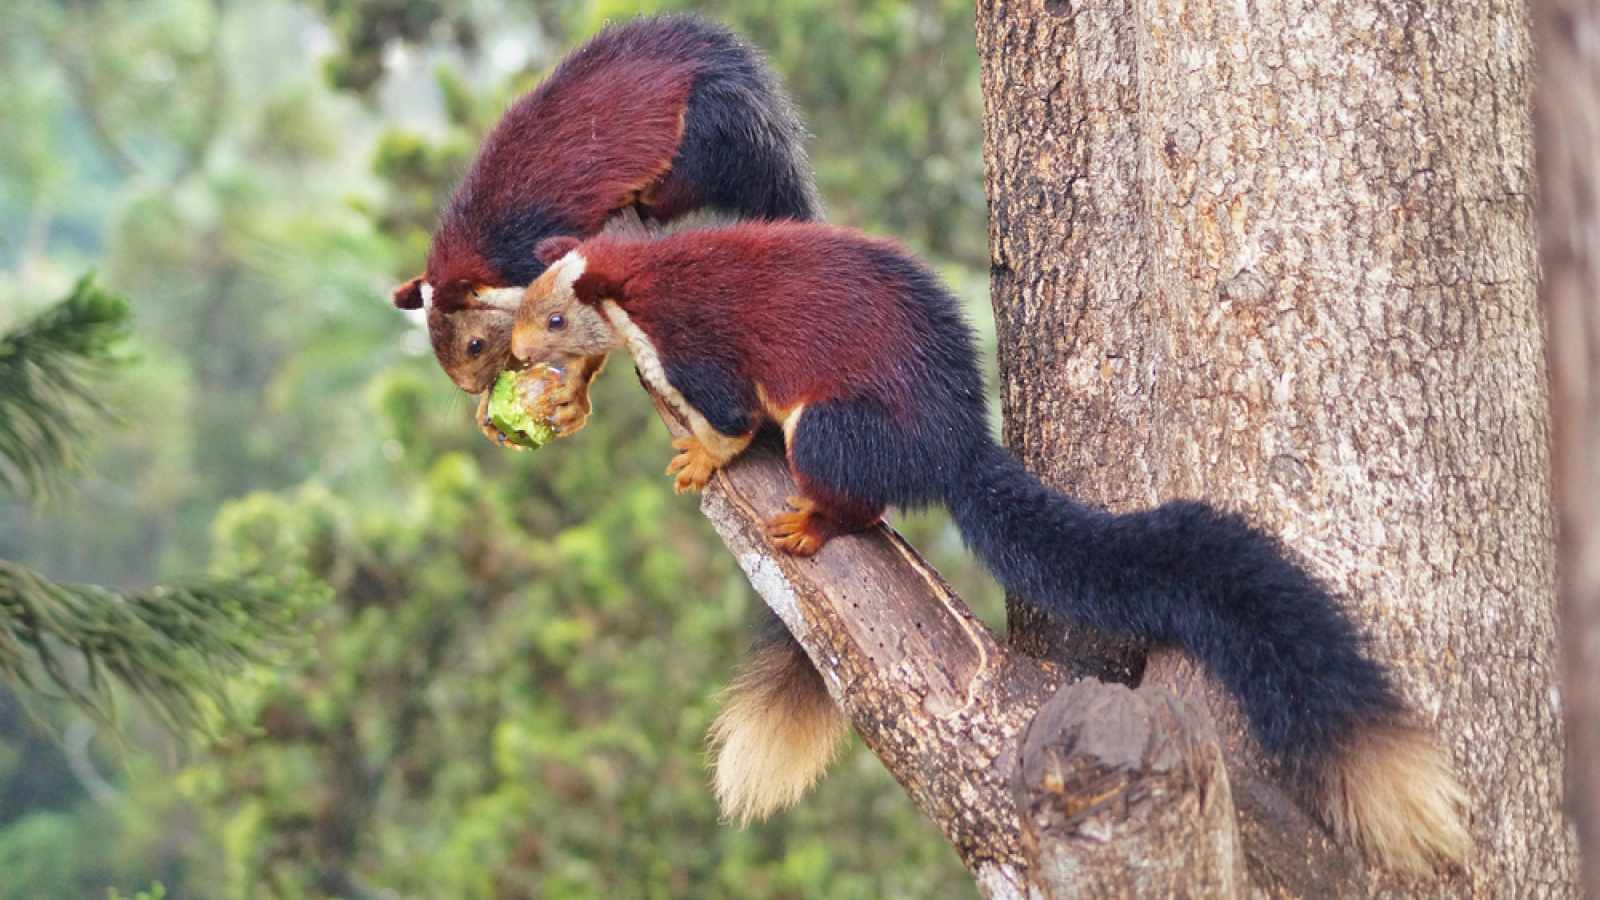 Two large squirrels are perched on a cut branch, one holding an acorn.